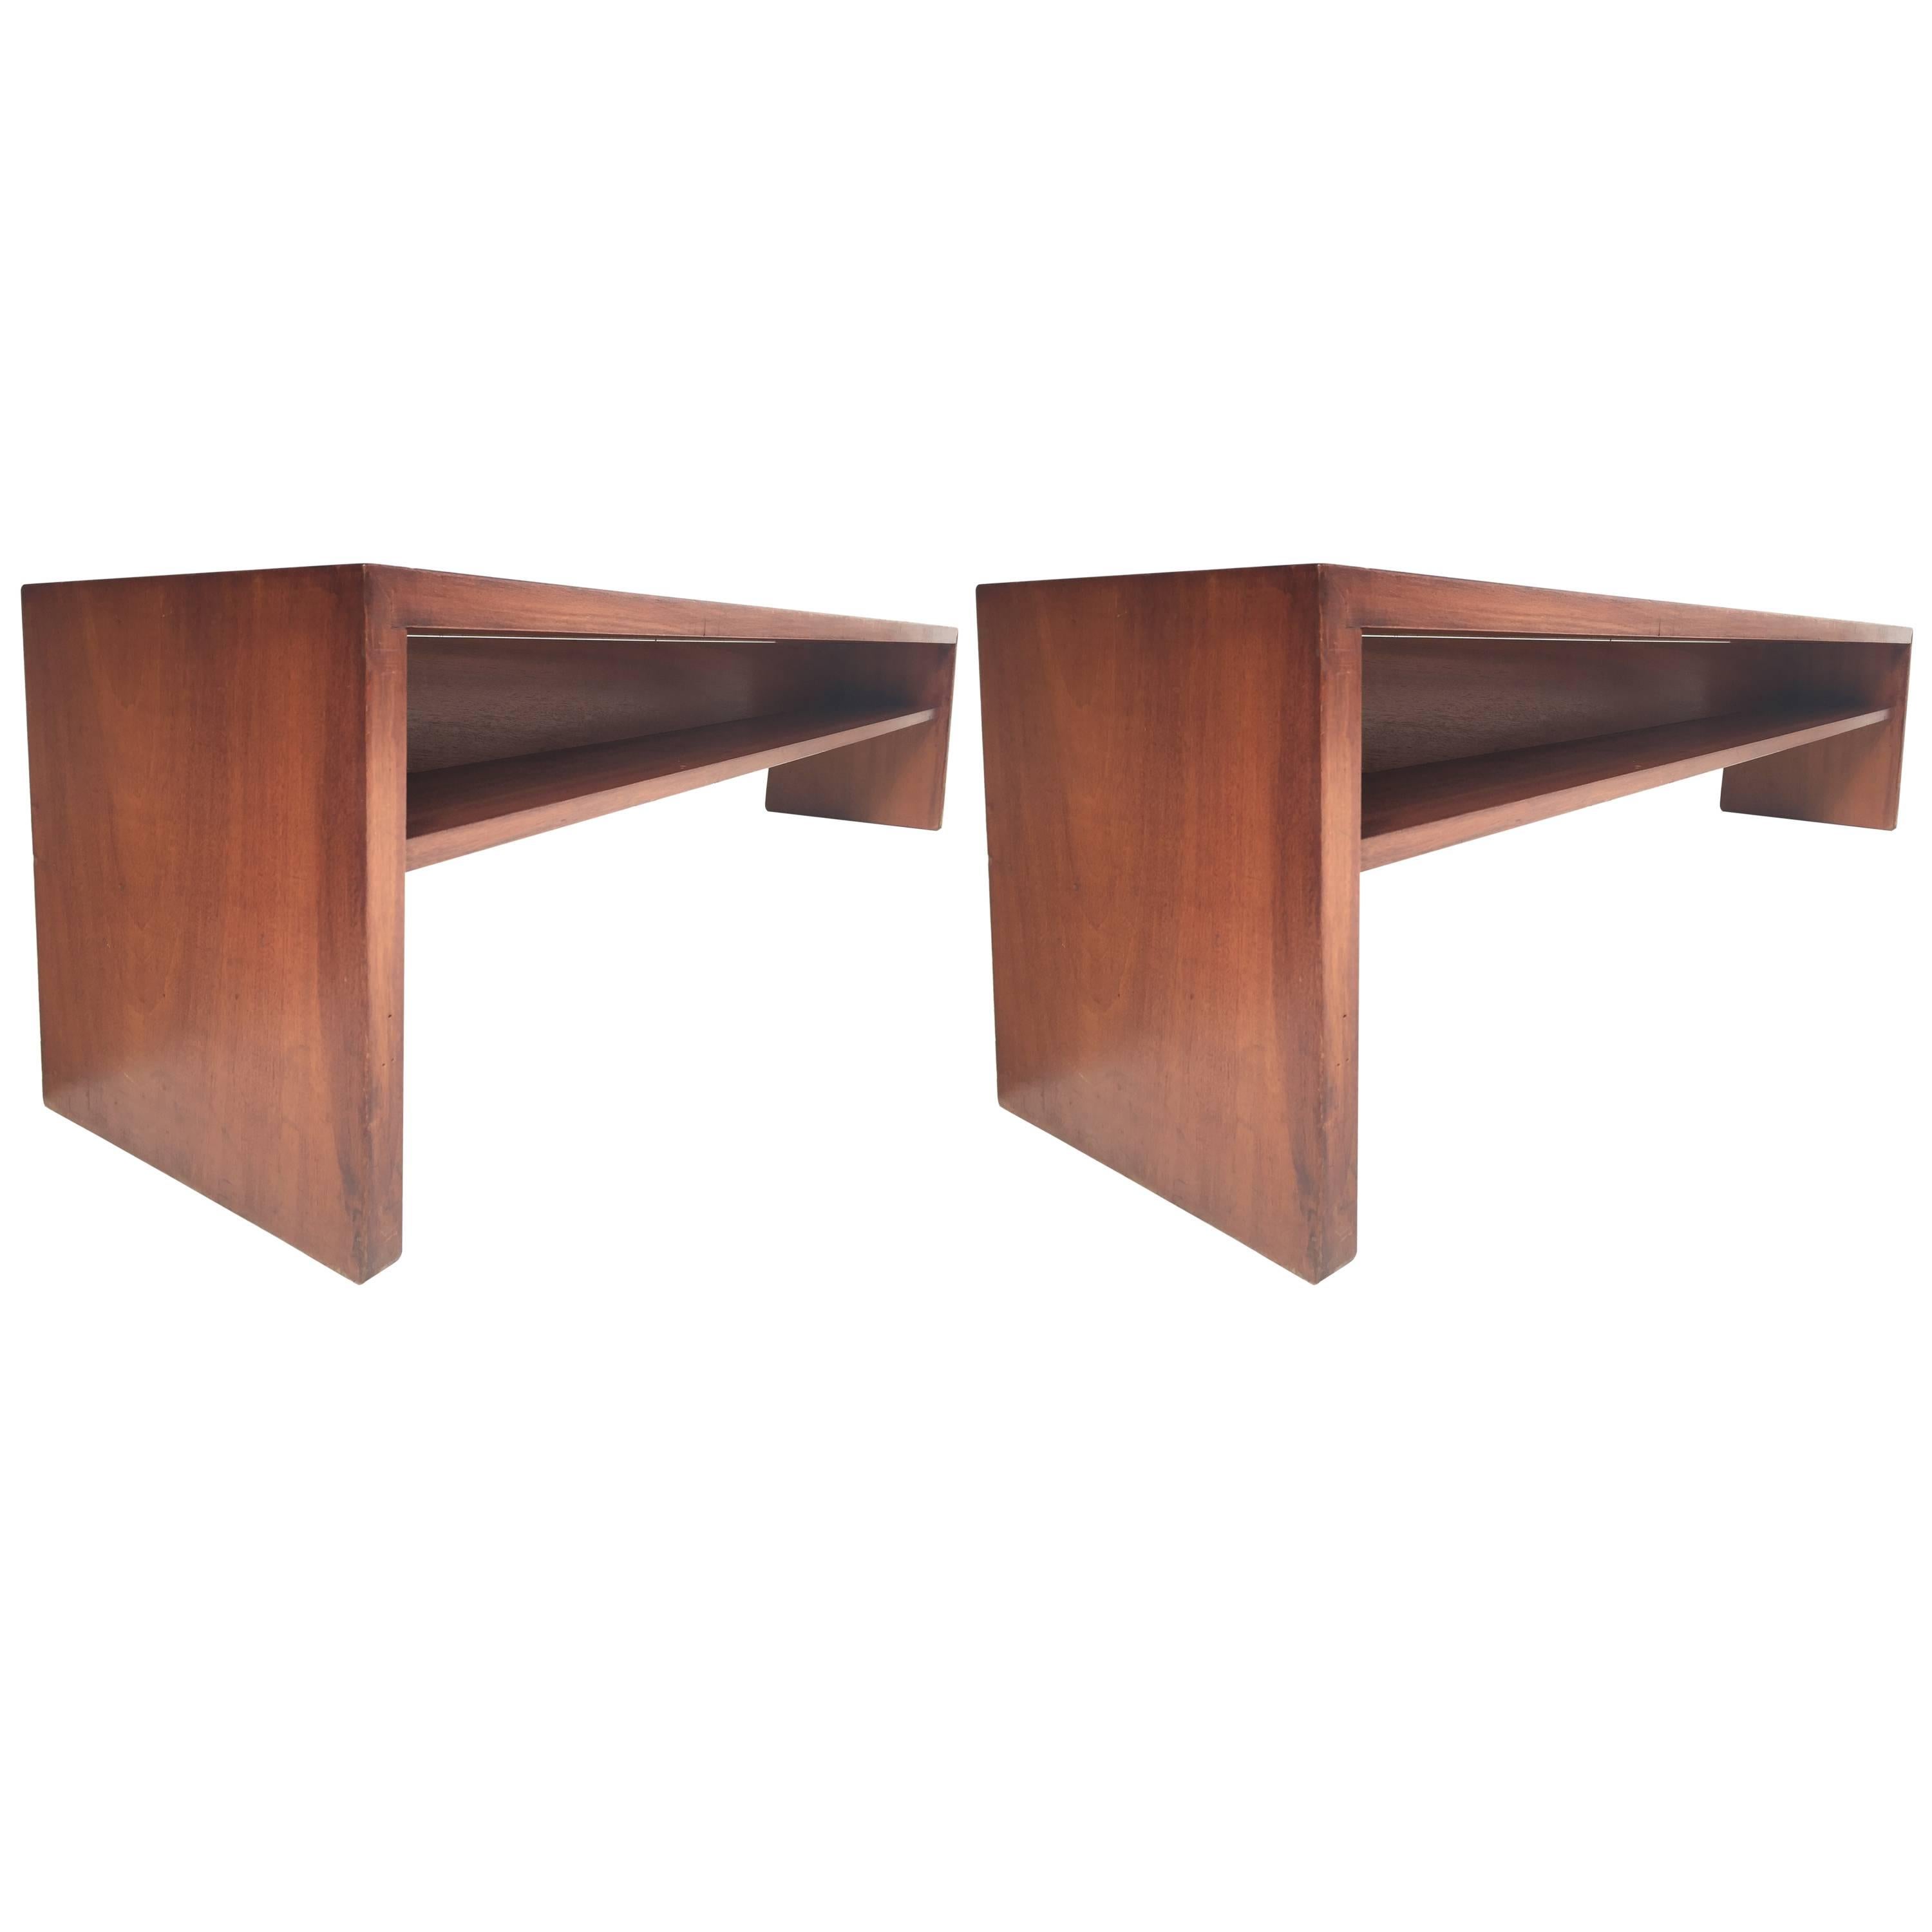 Unique Pair Solid Mahogany Church Benches by Dutch Architect Harry Nefkens, 1963